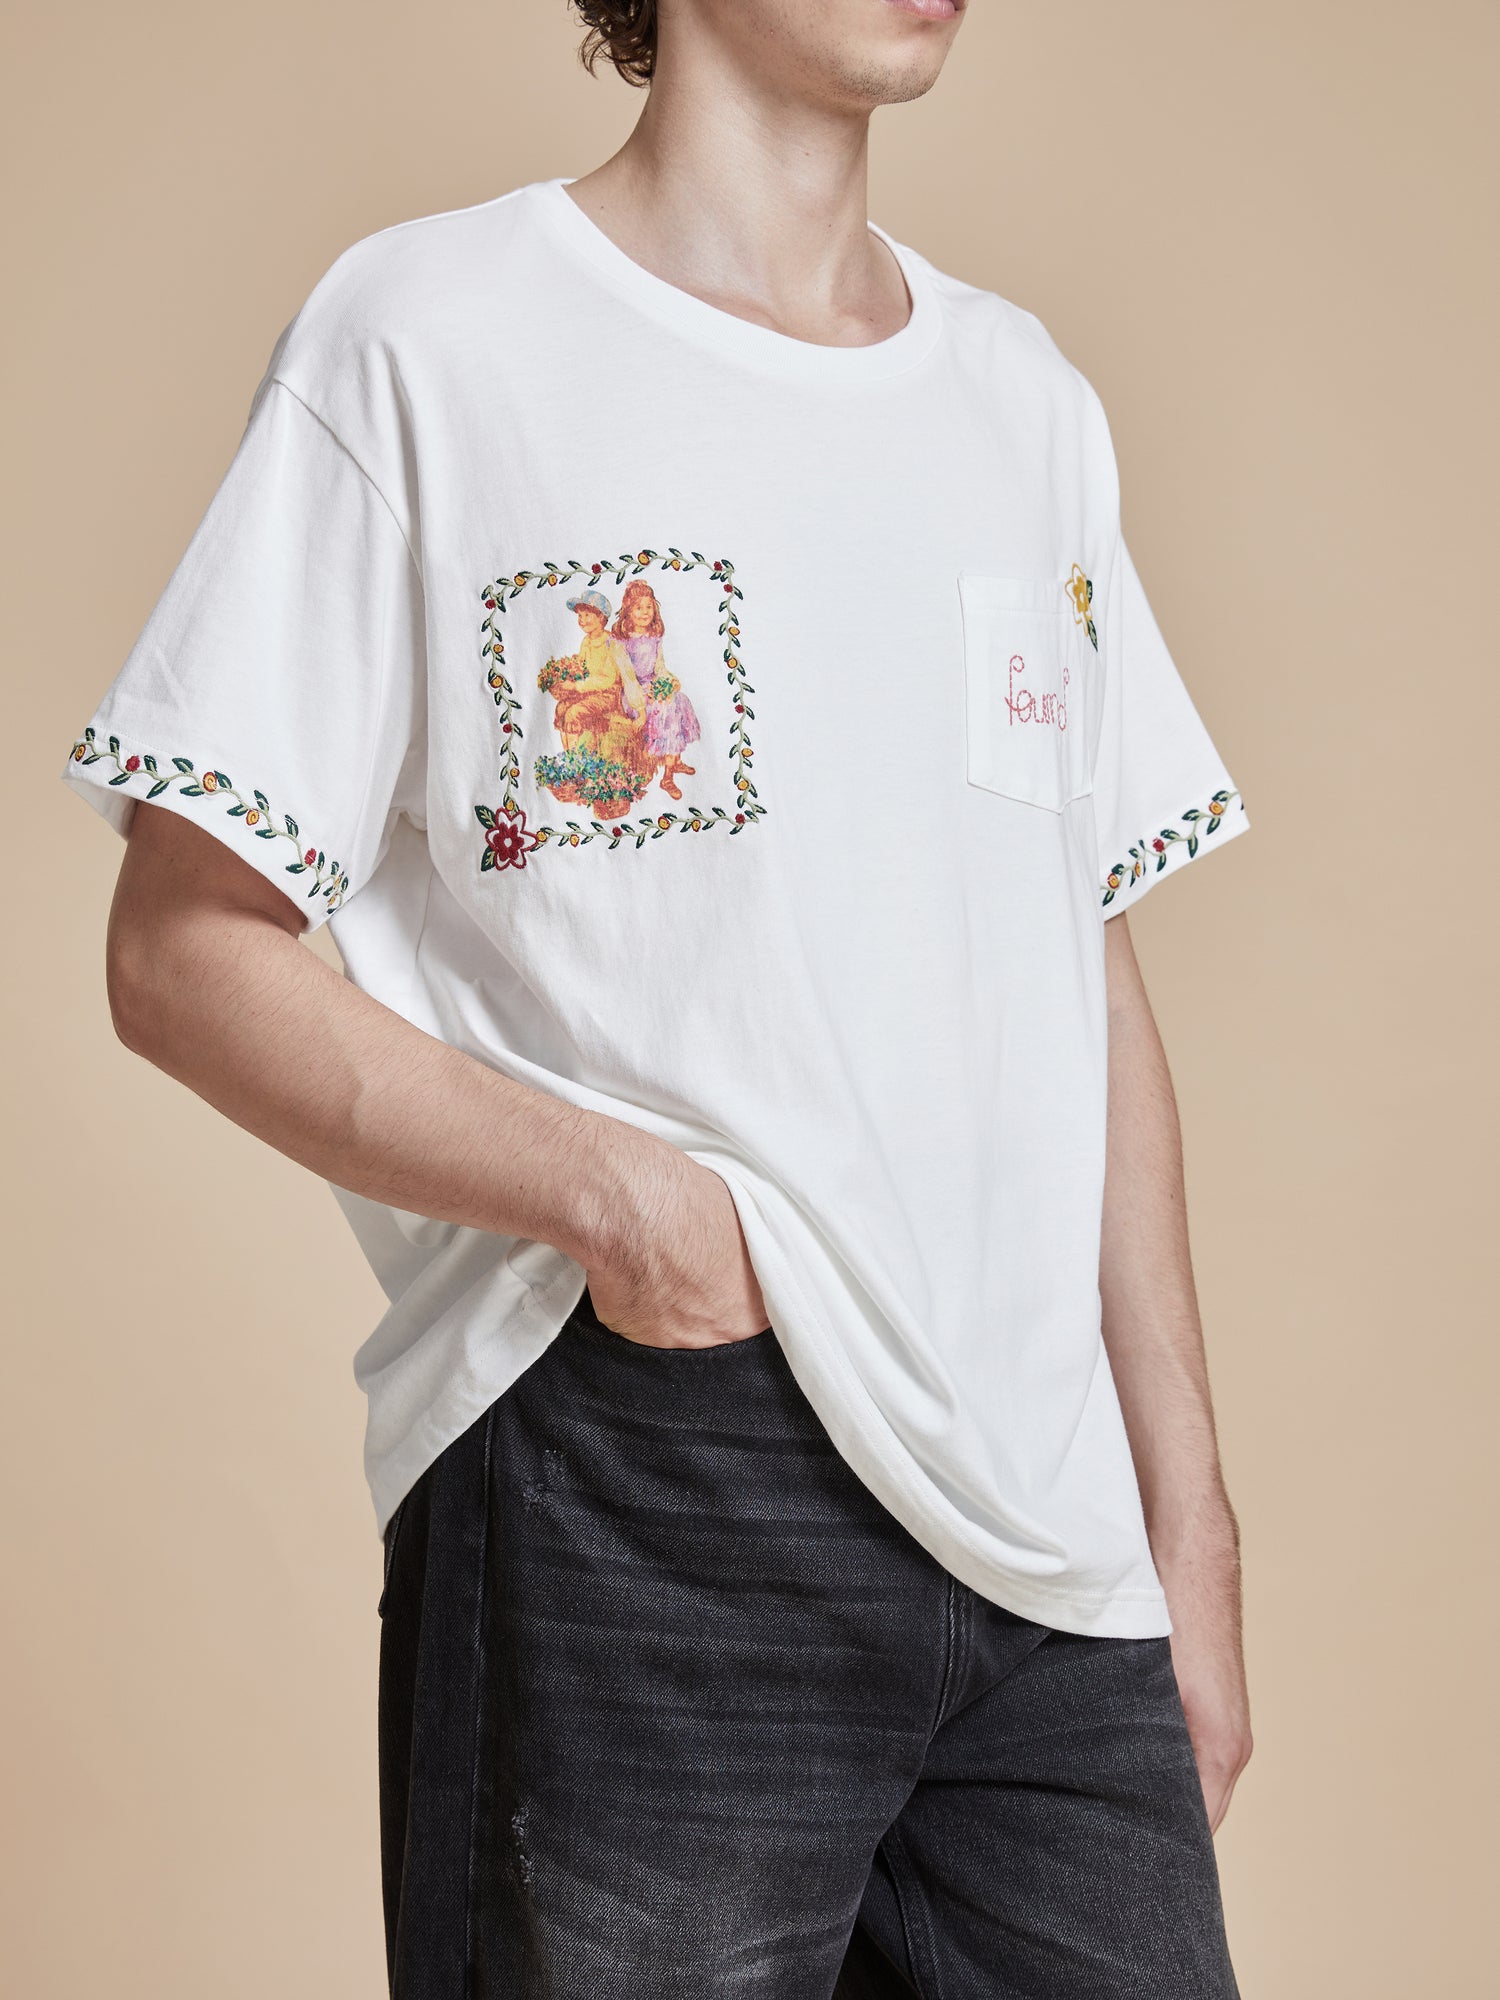 A man wearing a Found Flower Children Tee with floral Phulkari style embroideries.